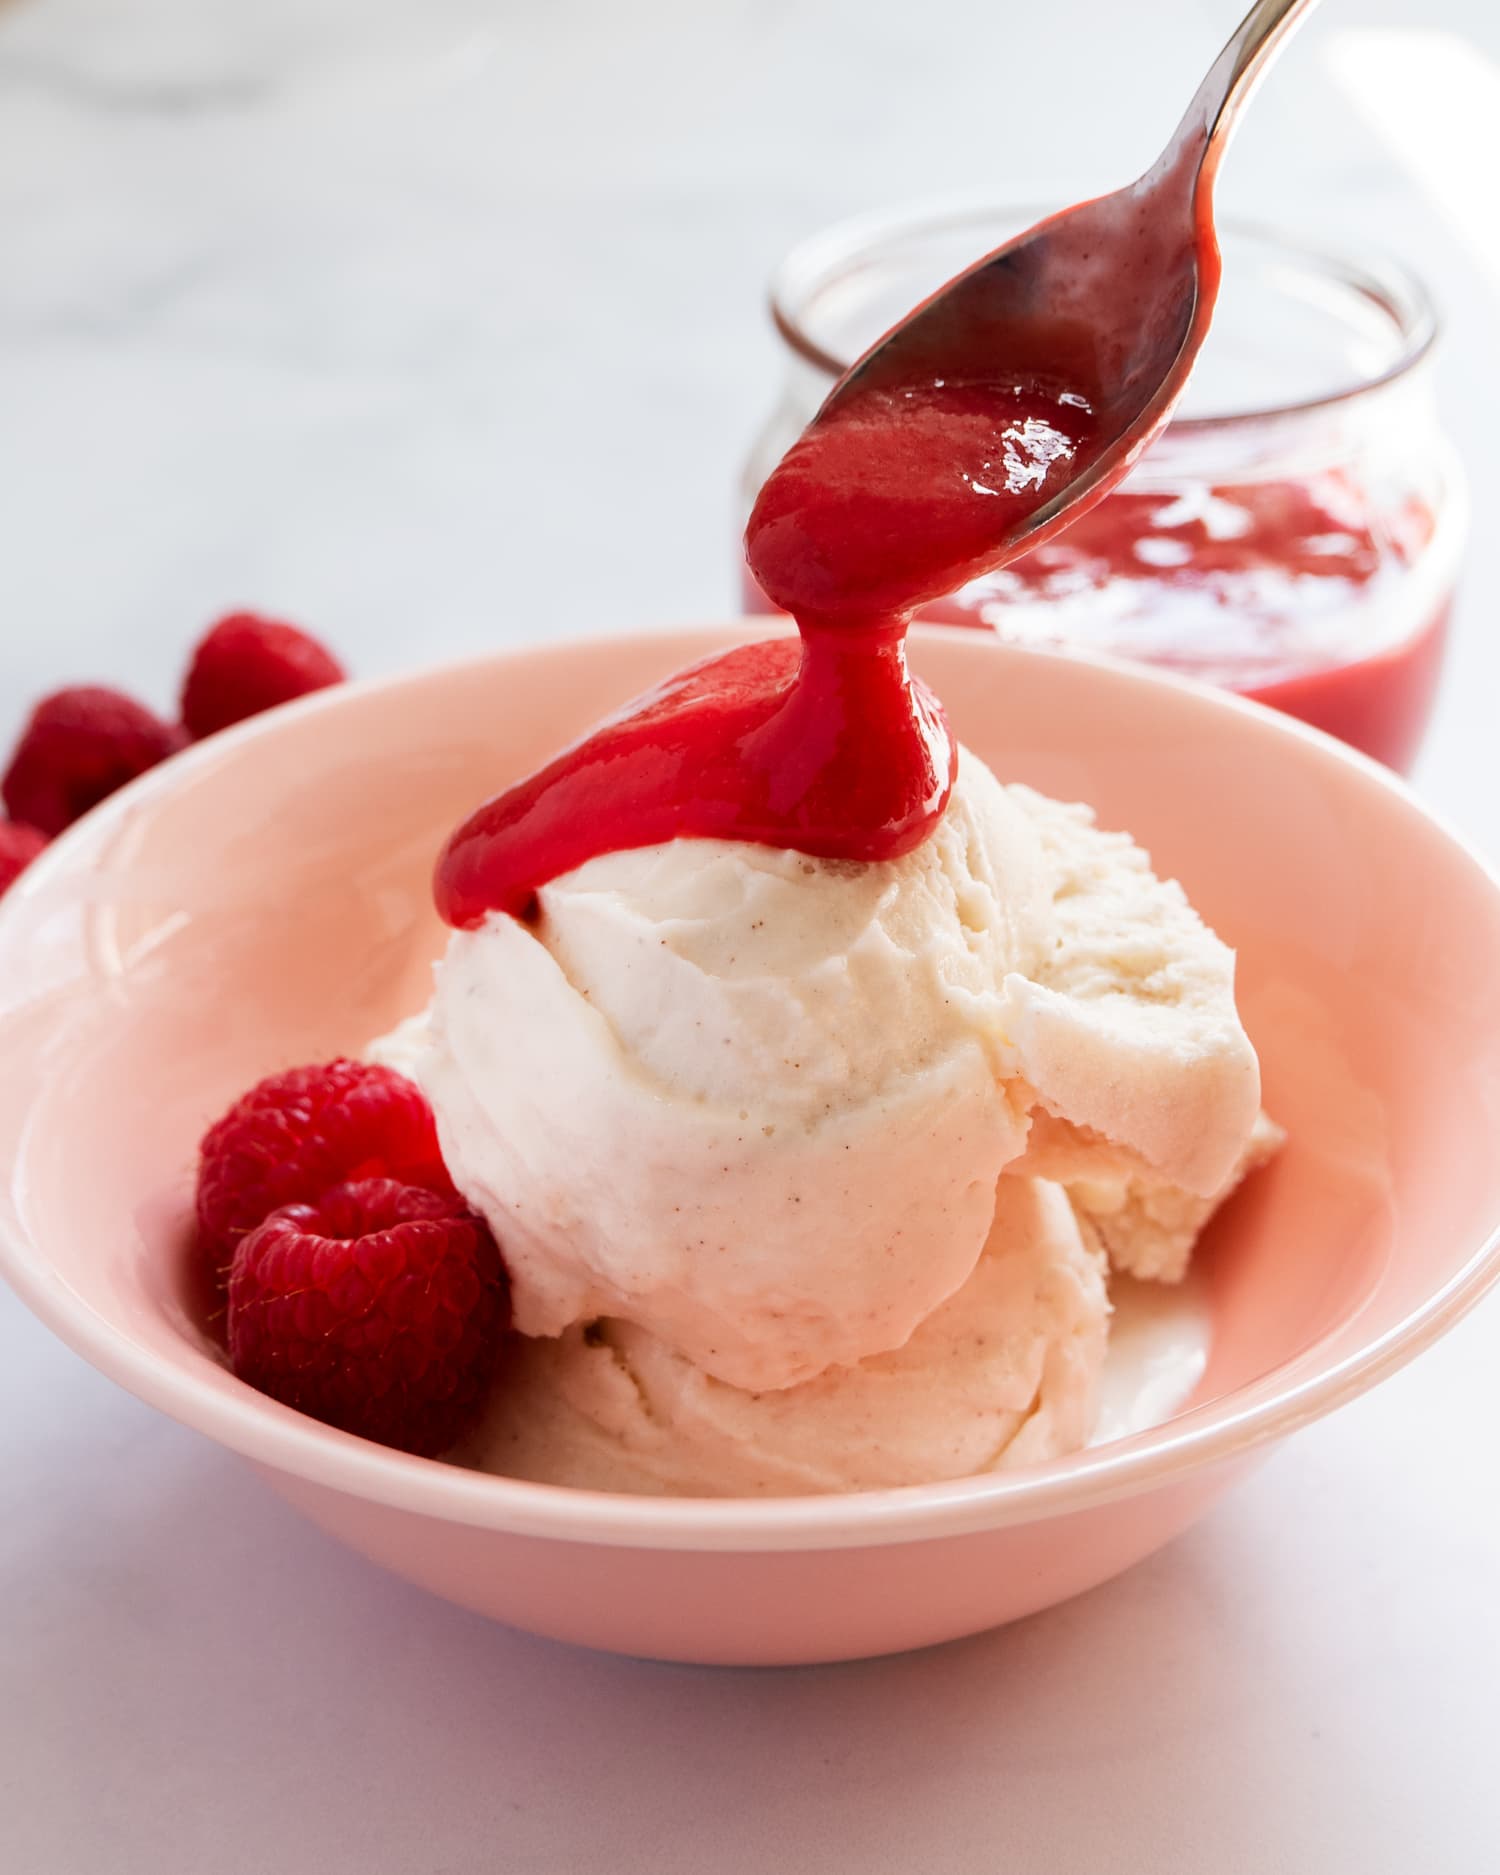 Raspberry Coulis Is a Simple and Special Sauce for Your Favorite Dessert